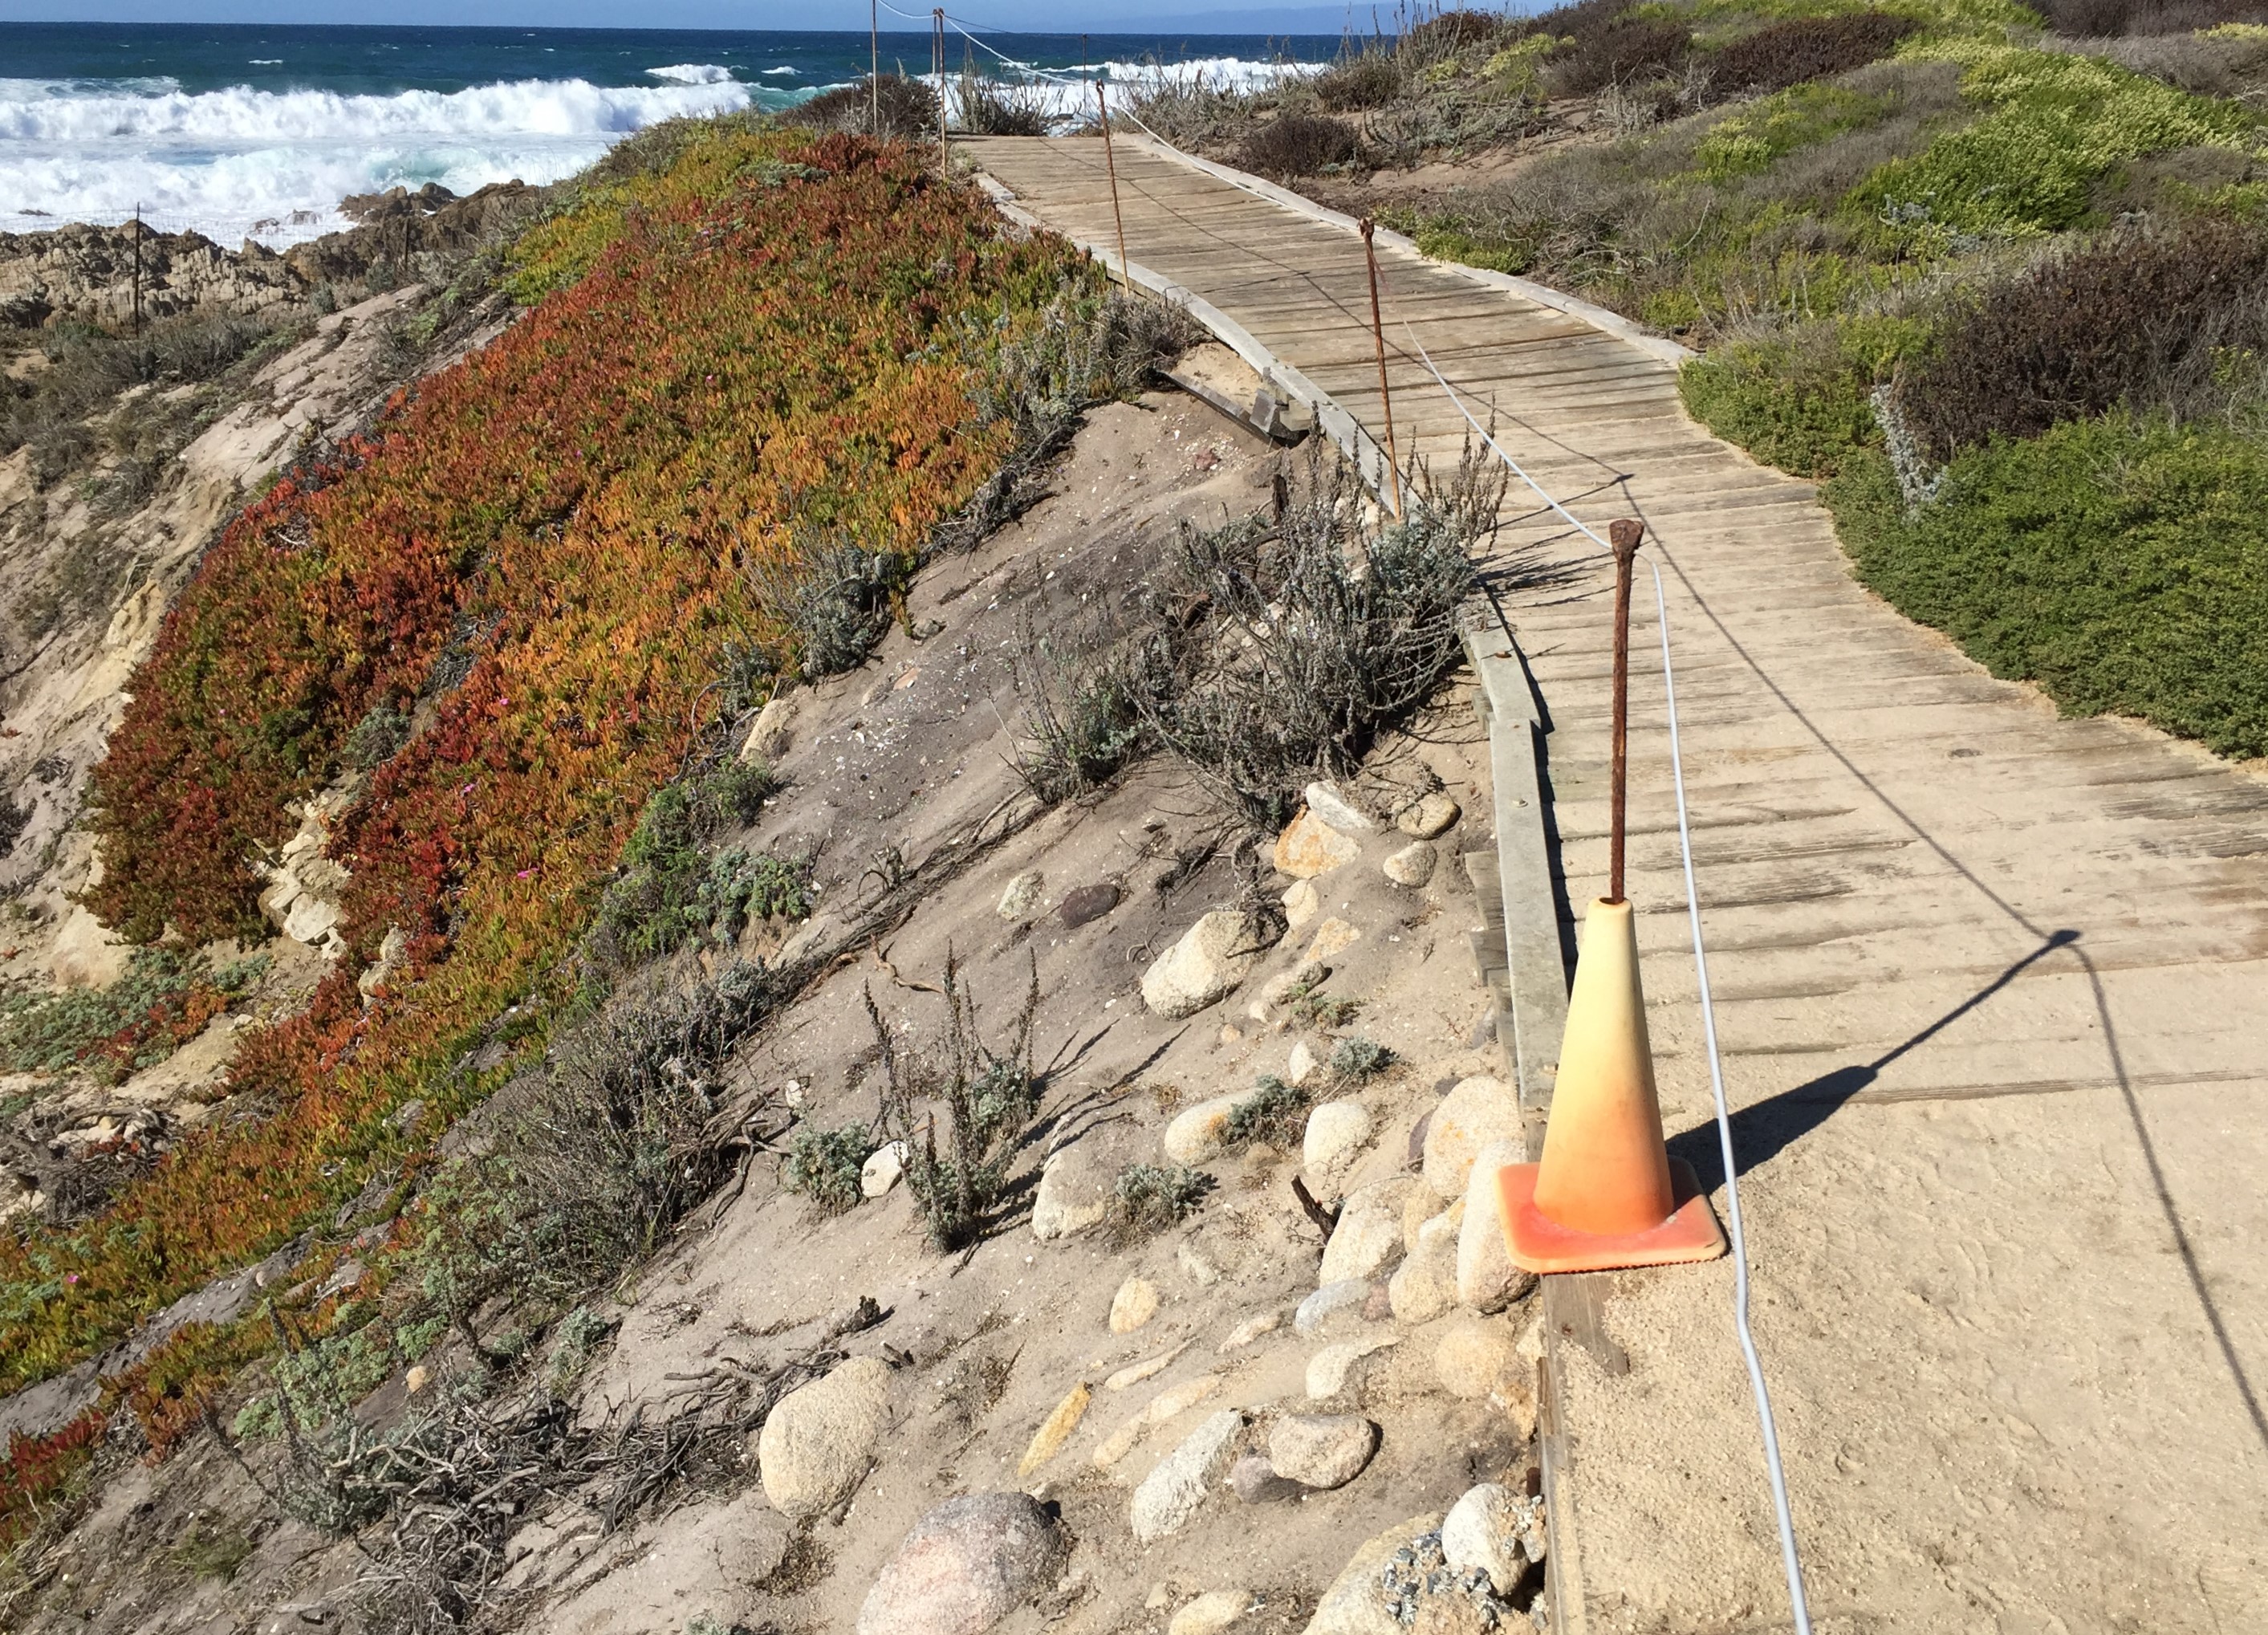 Current boardwalk section with erosion